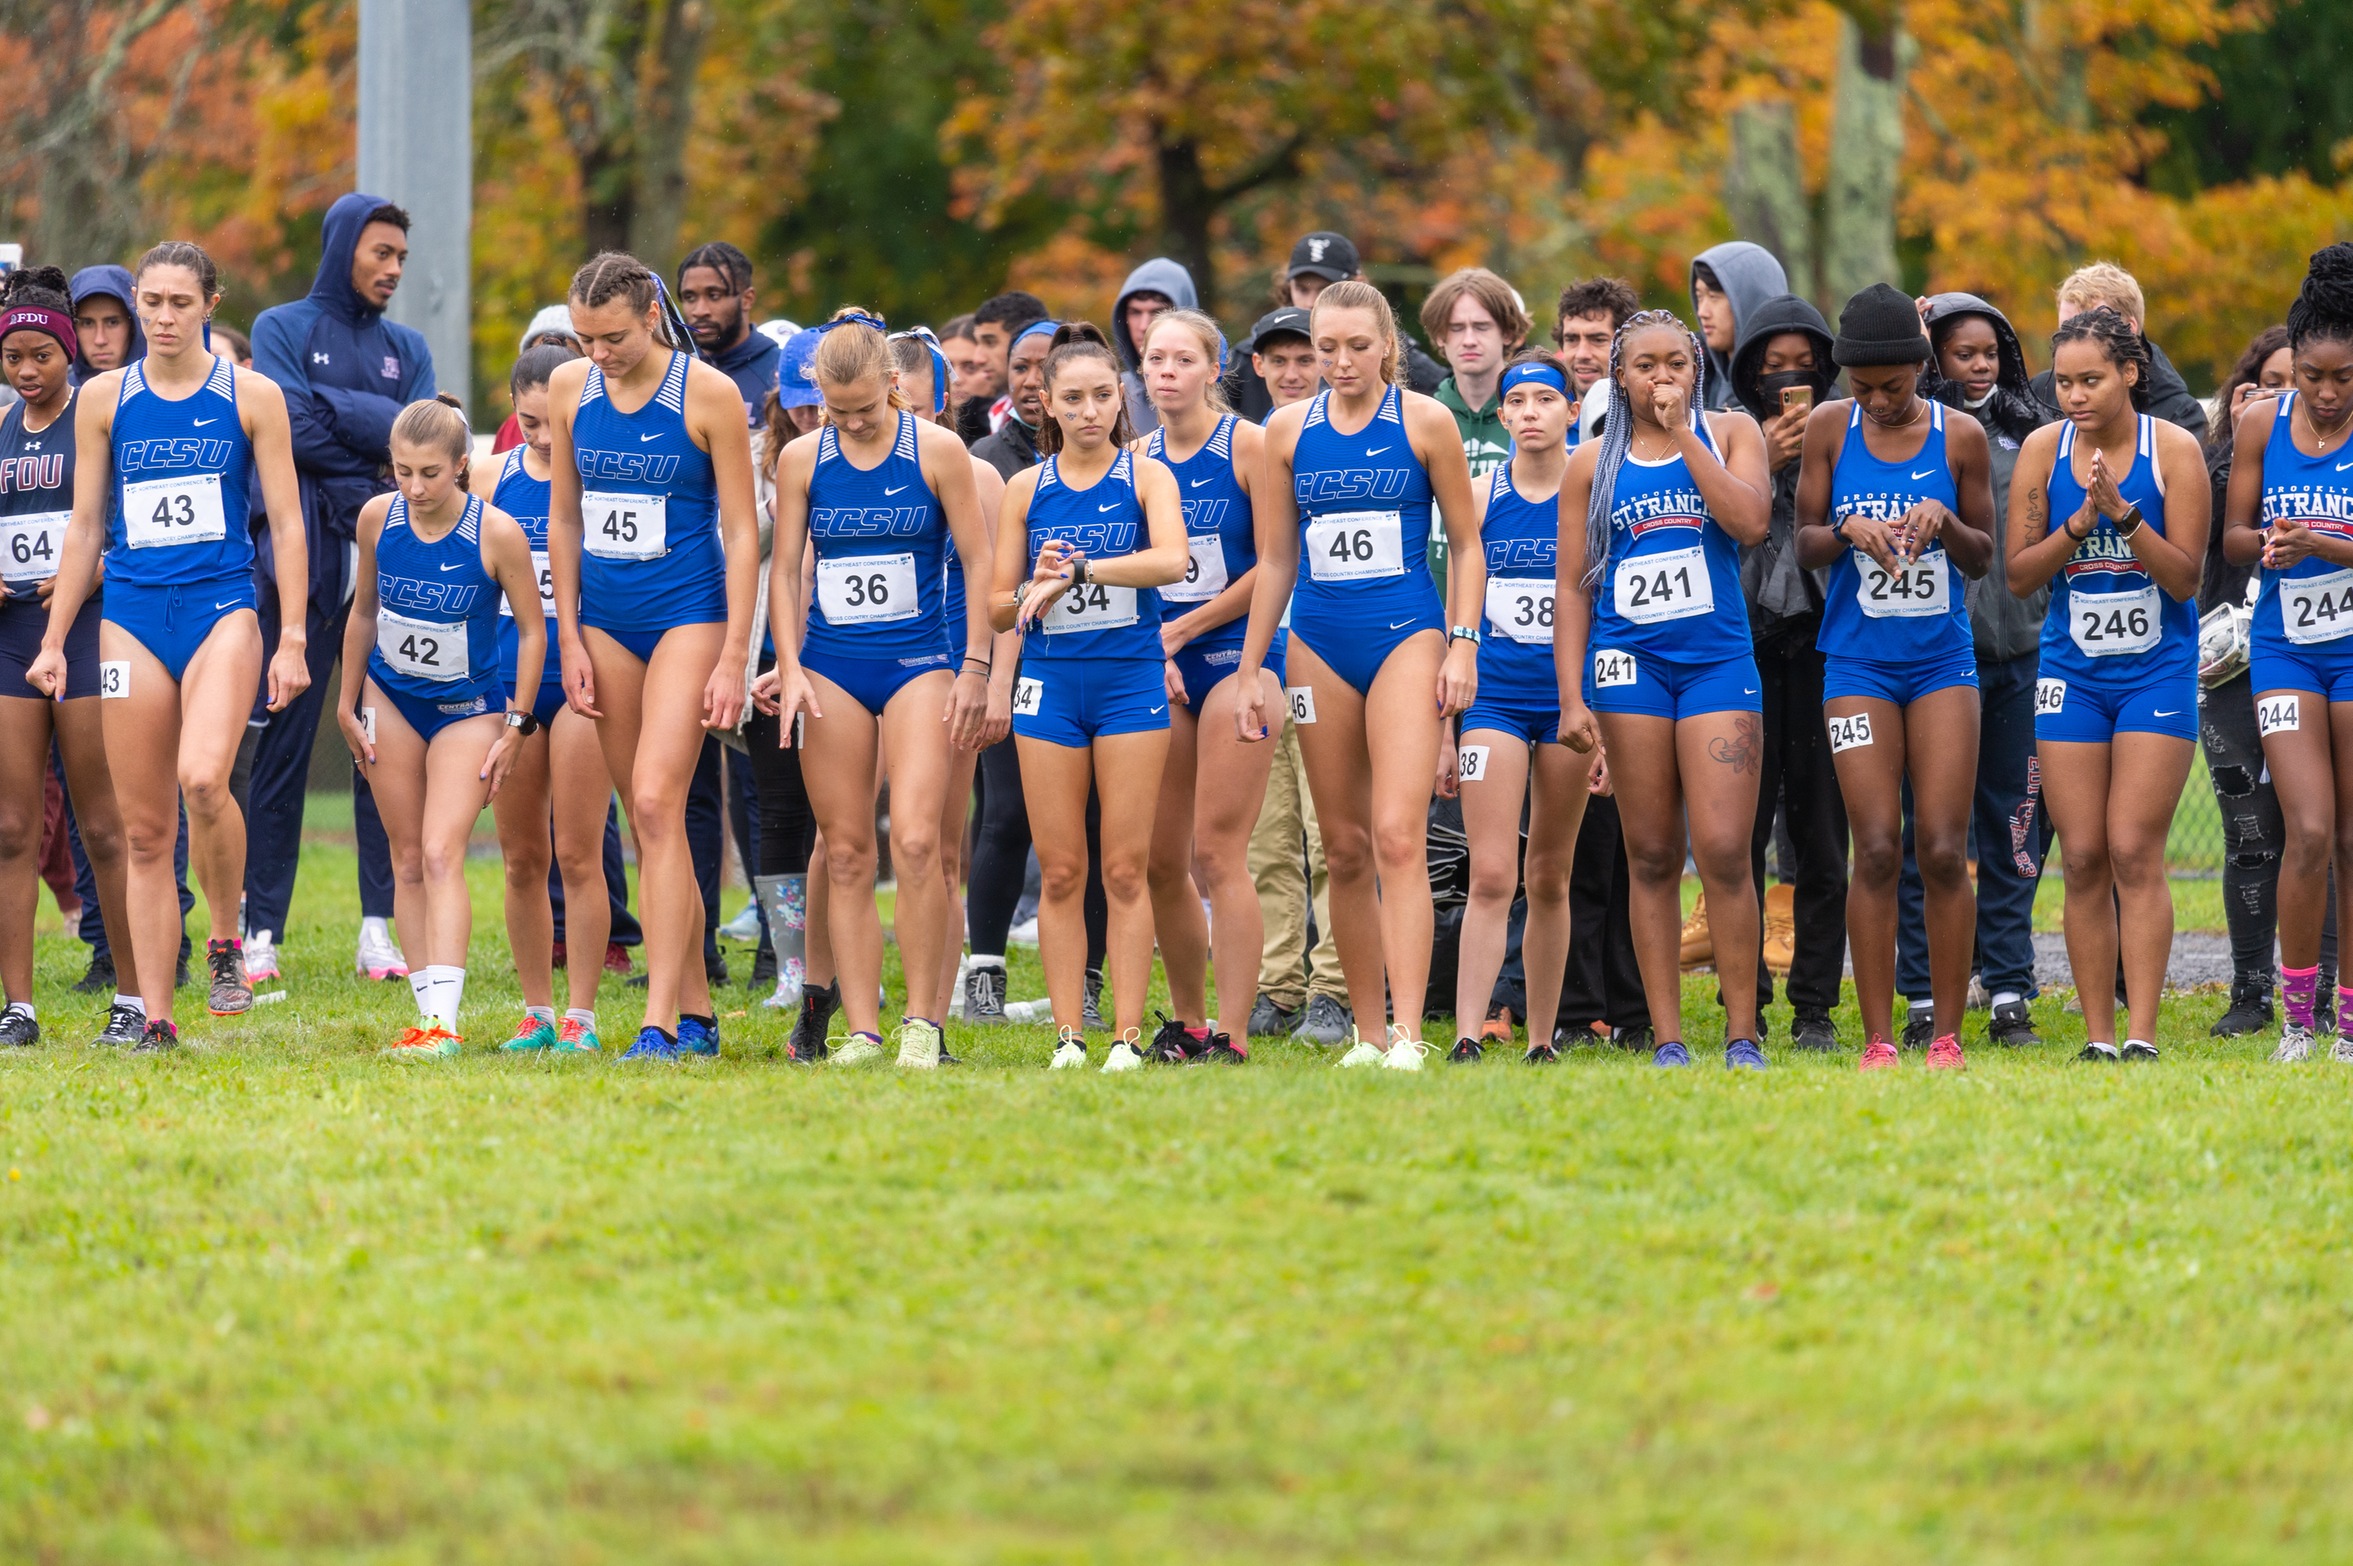 Rafter Takes First, CCSU Finishes Sixth at IC4A/ECAC Championships